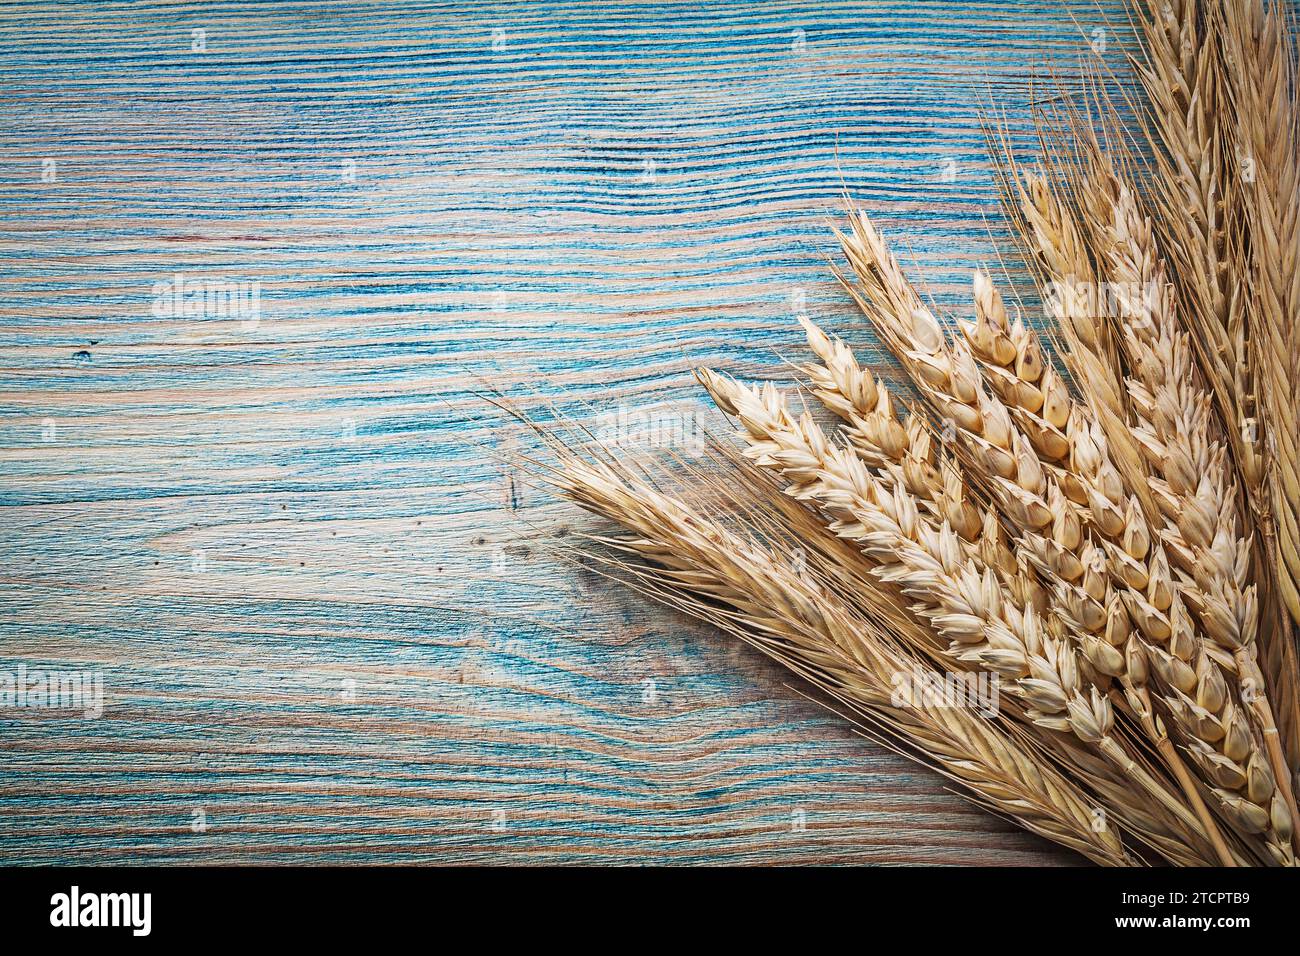 Bread rye ears on vintage wooden board food and drink concept Stock Photo